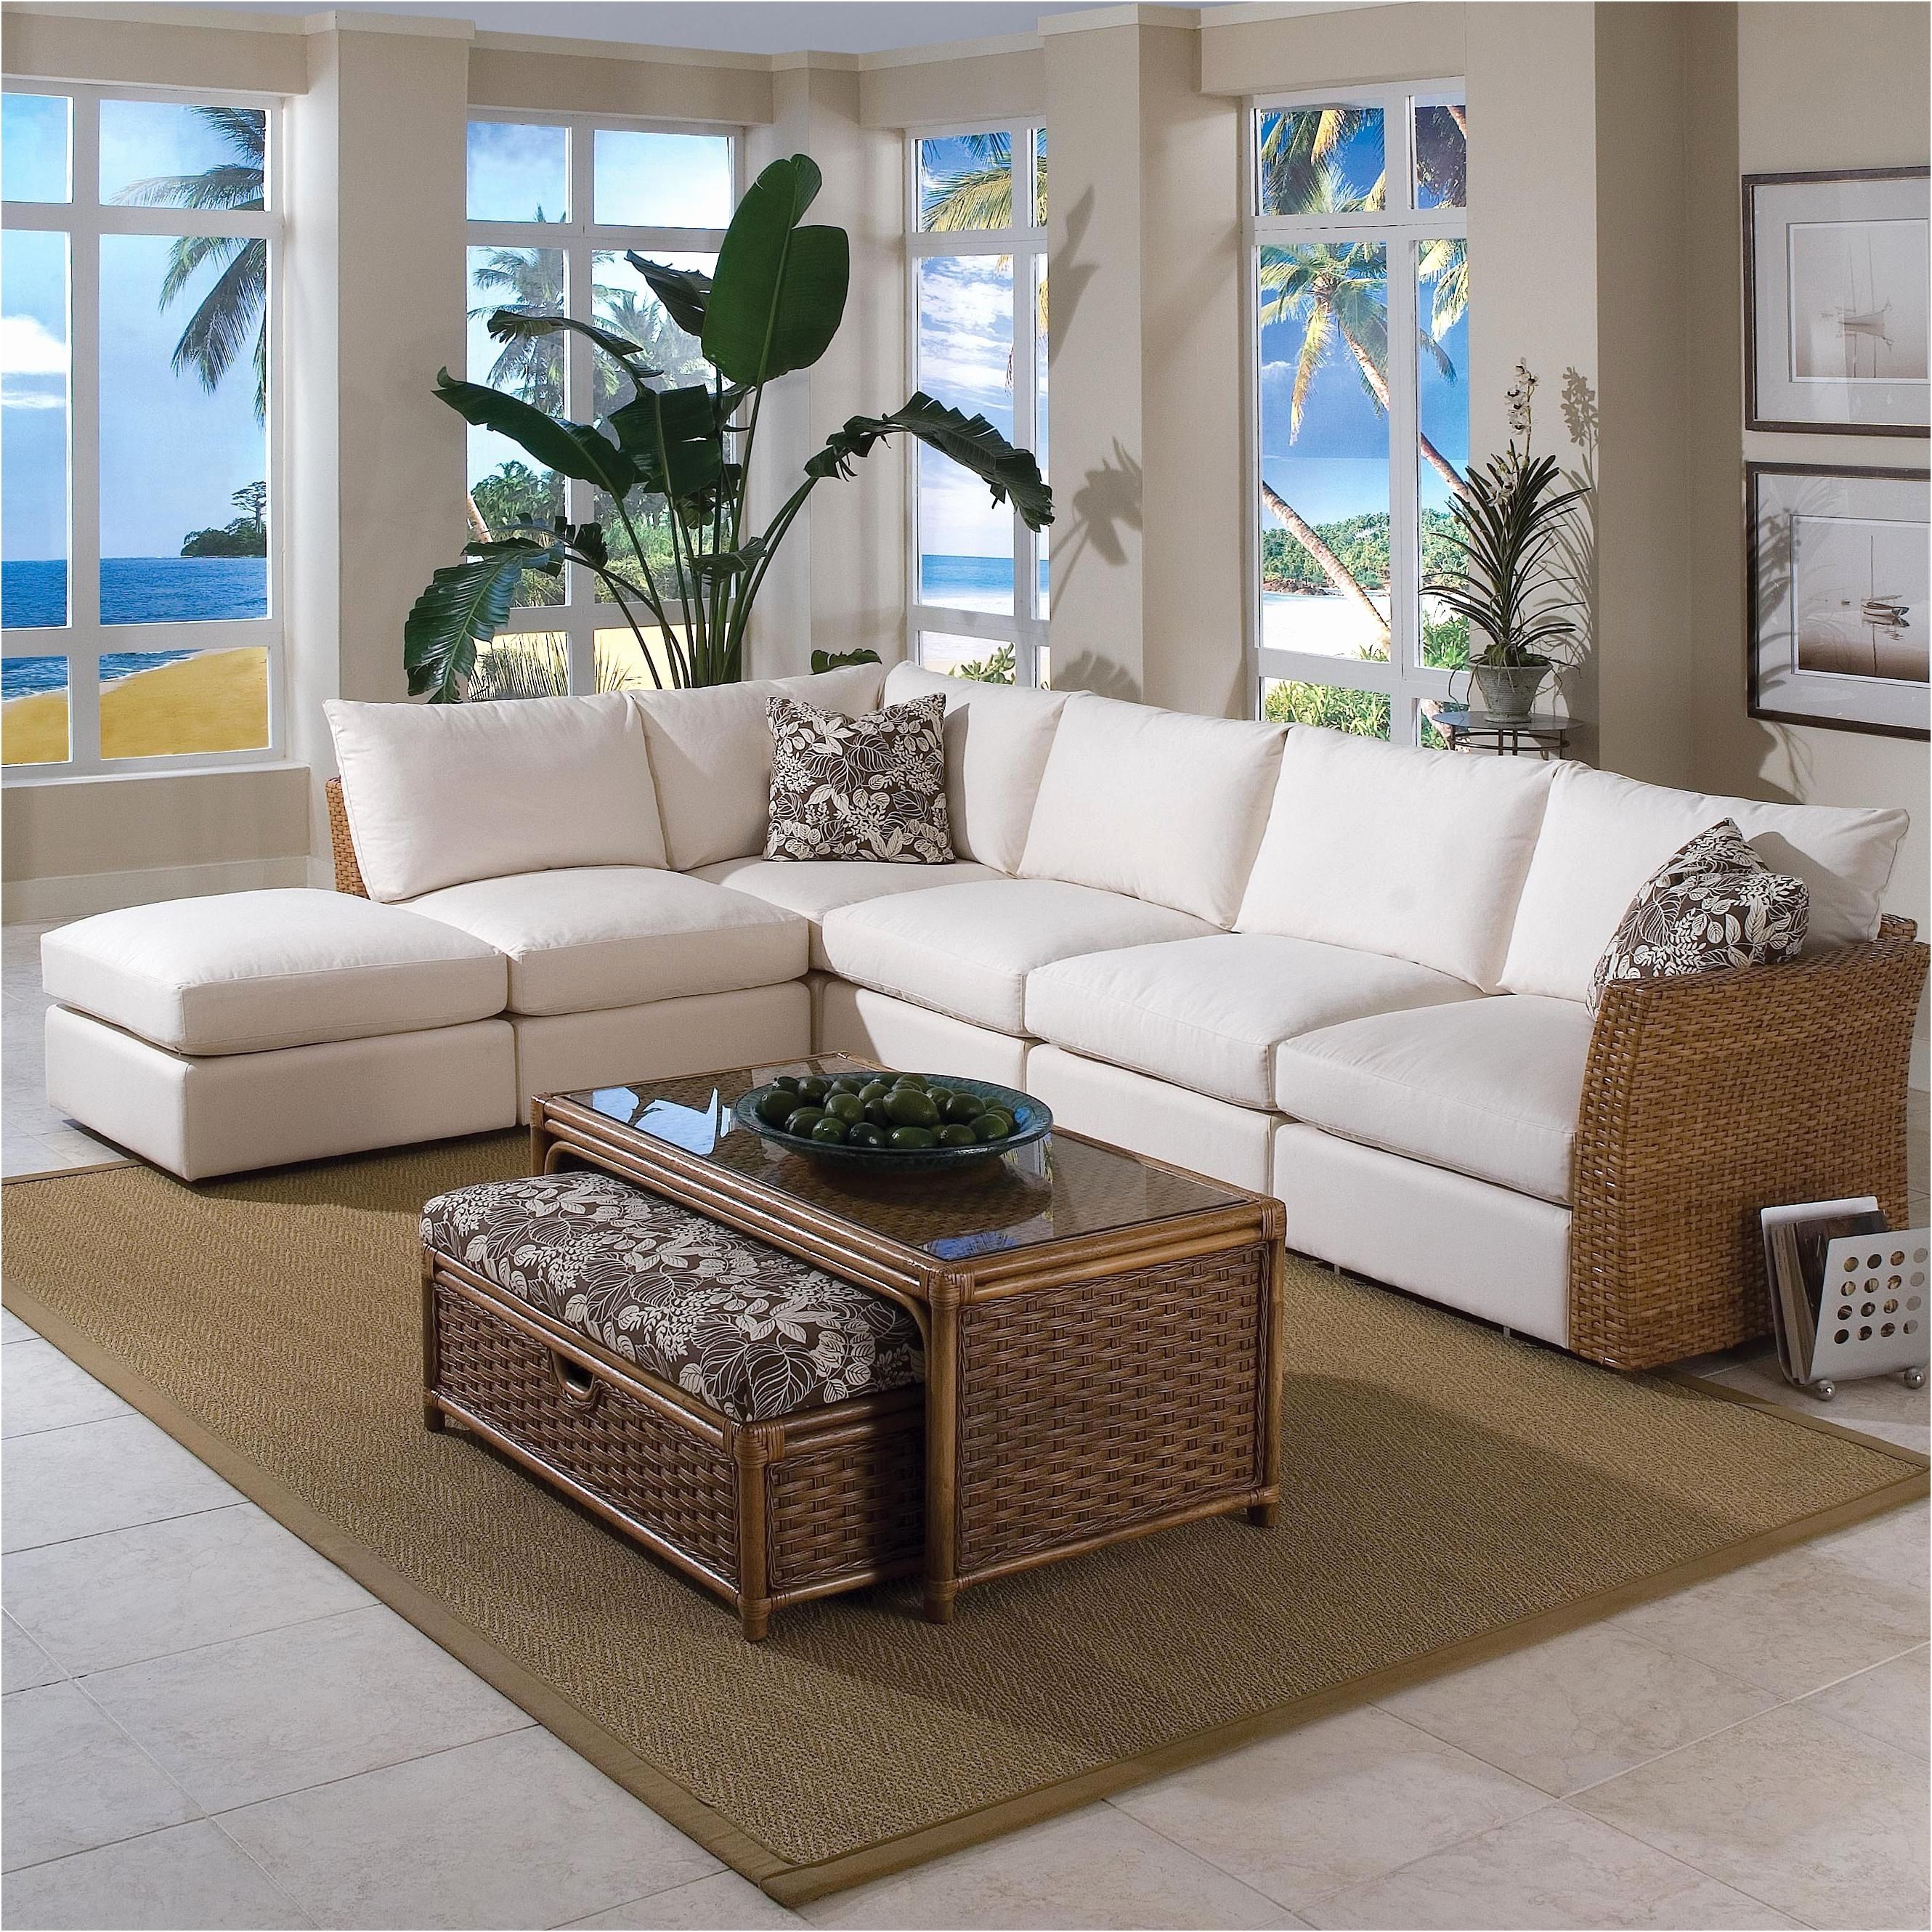 Awesome Cheap Sectional Sofas Awesome – Intuisiblog In Greenville Nc Sectional Sofas (Photo 3 of 10)